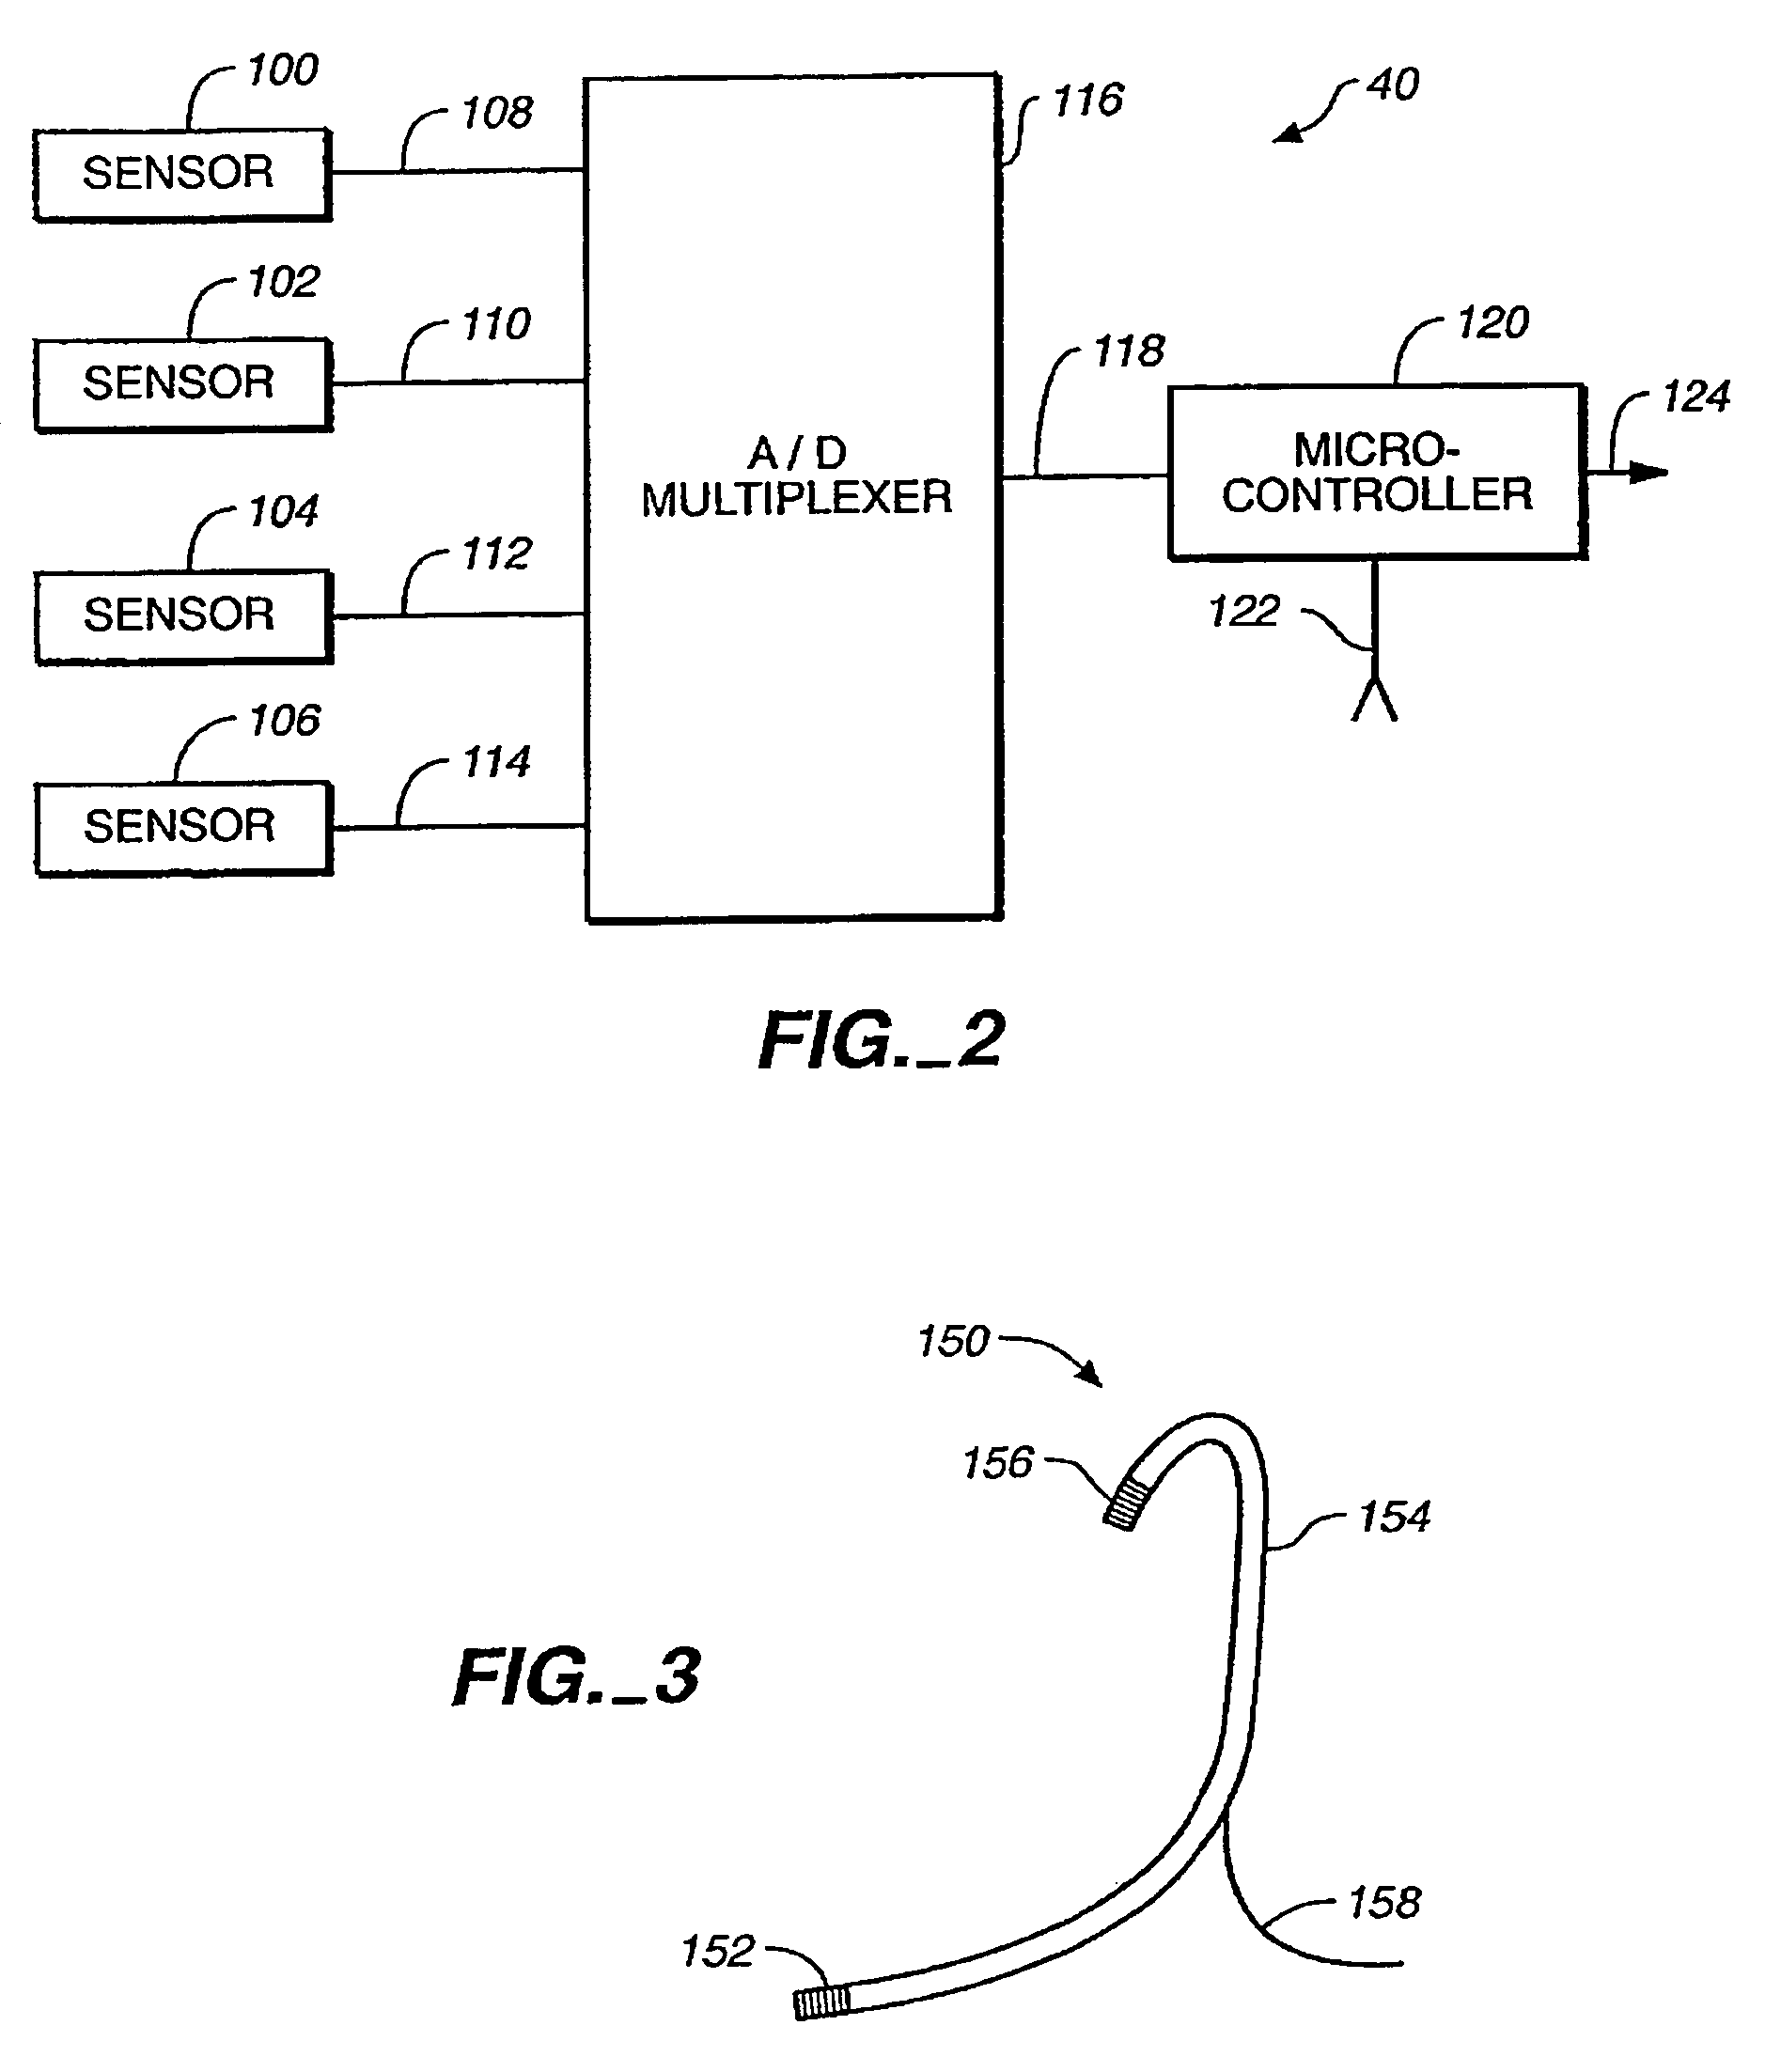 Method for displaying information responsive to sensing a physical presence proximate to a computer input device